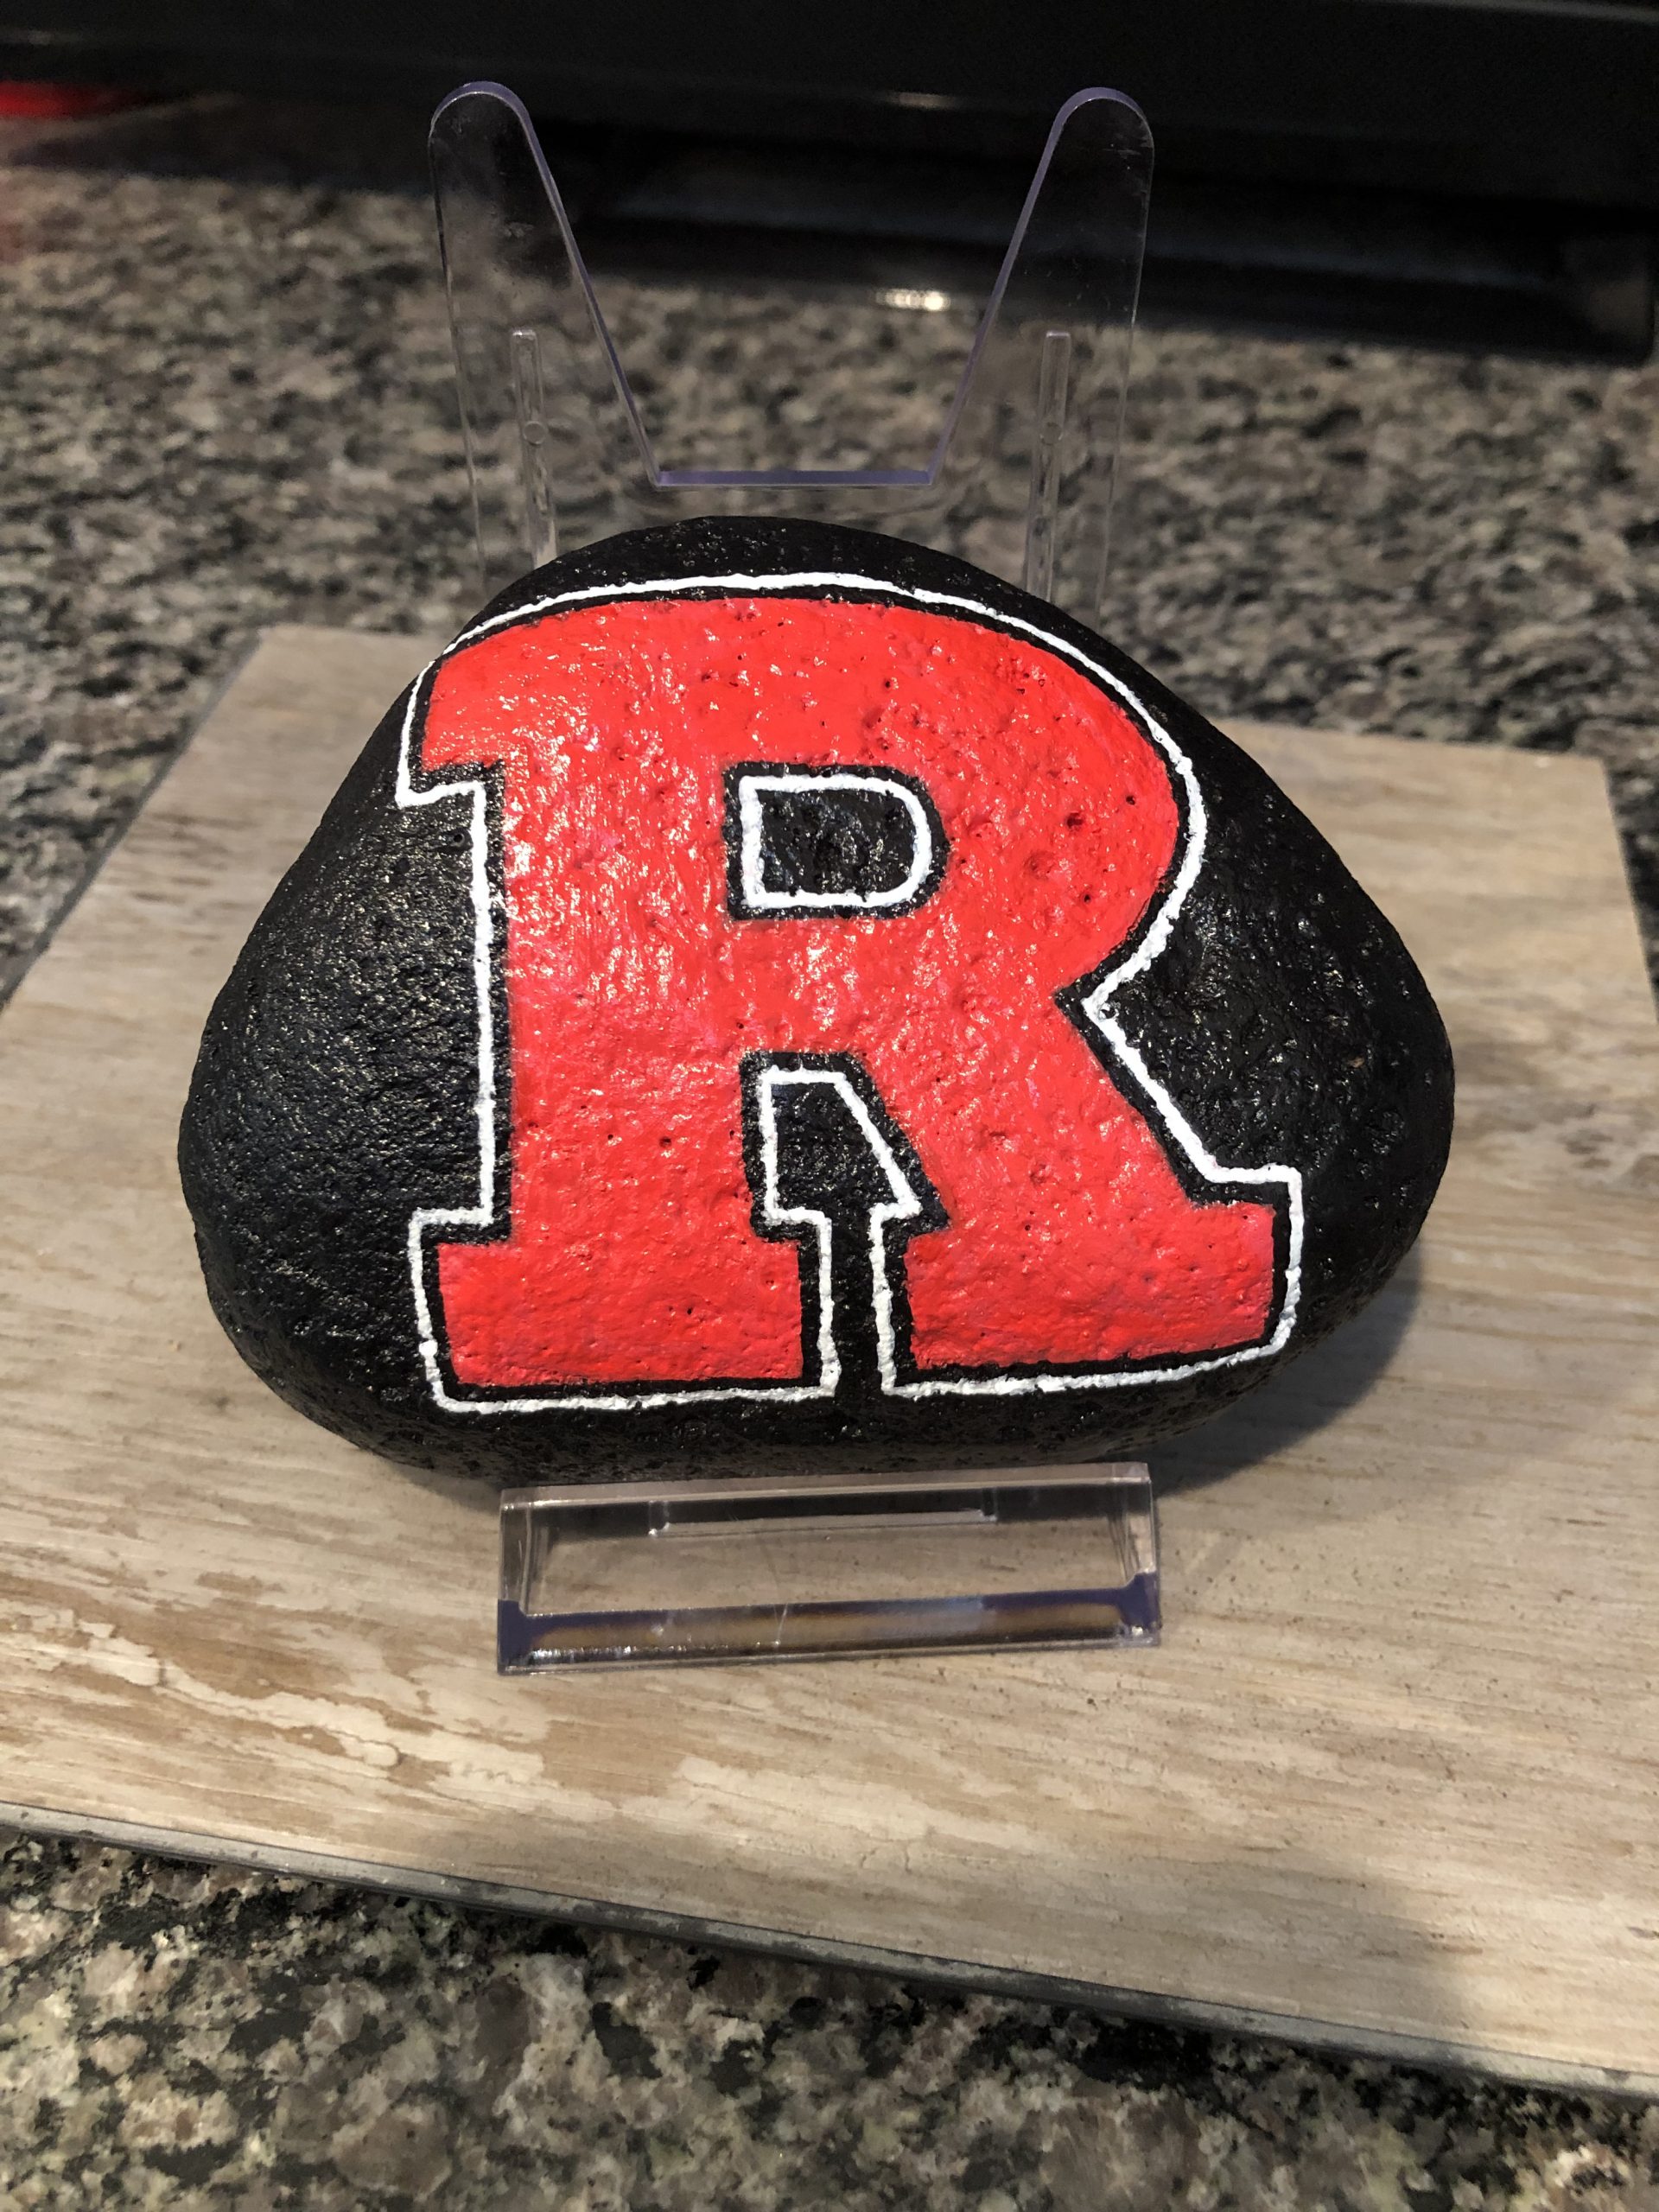 Rutgers Red Letter "R" painted on a rock